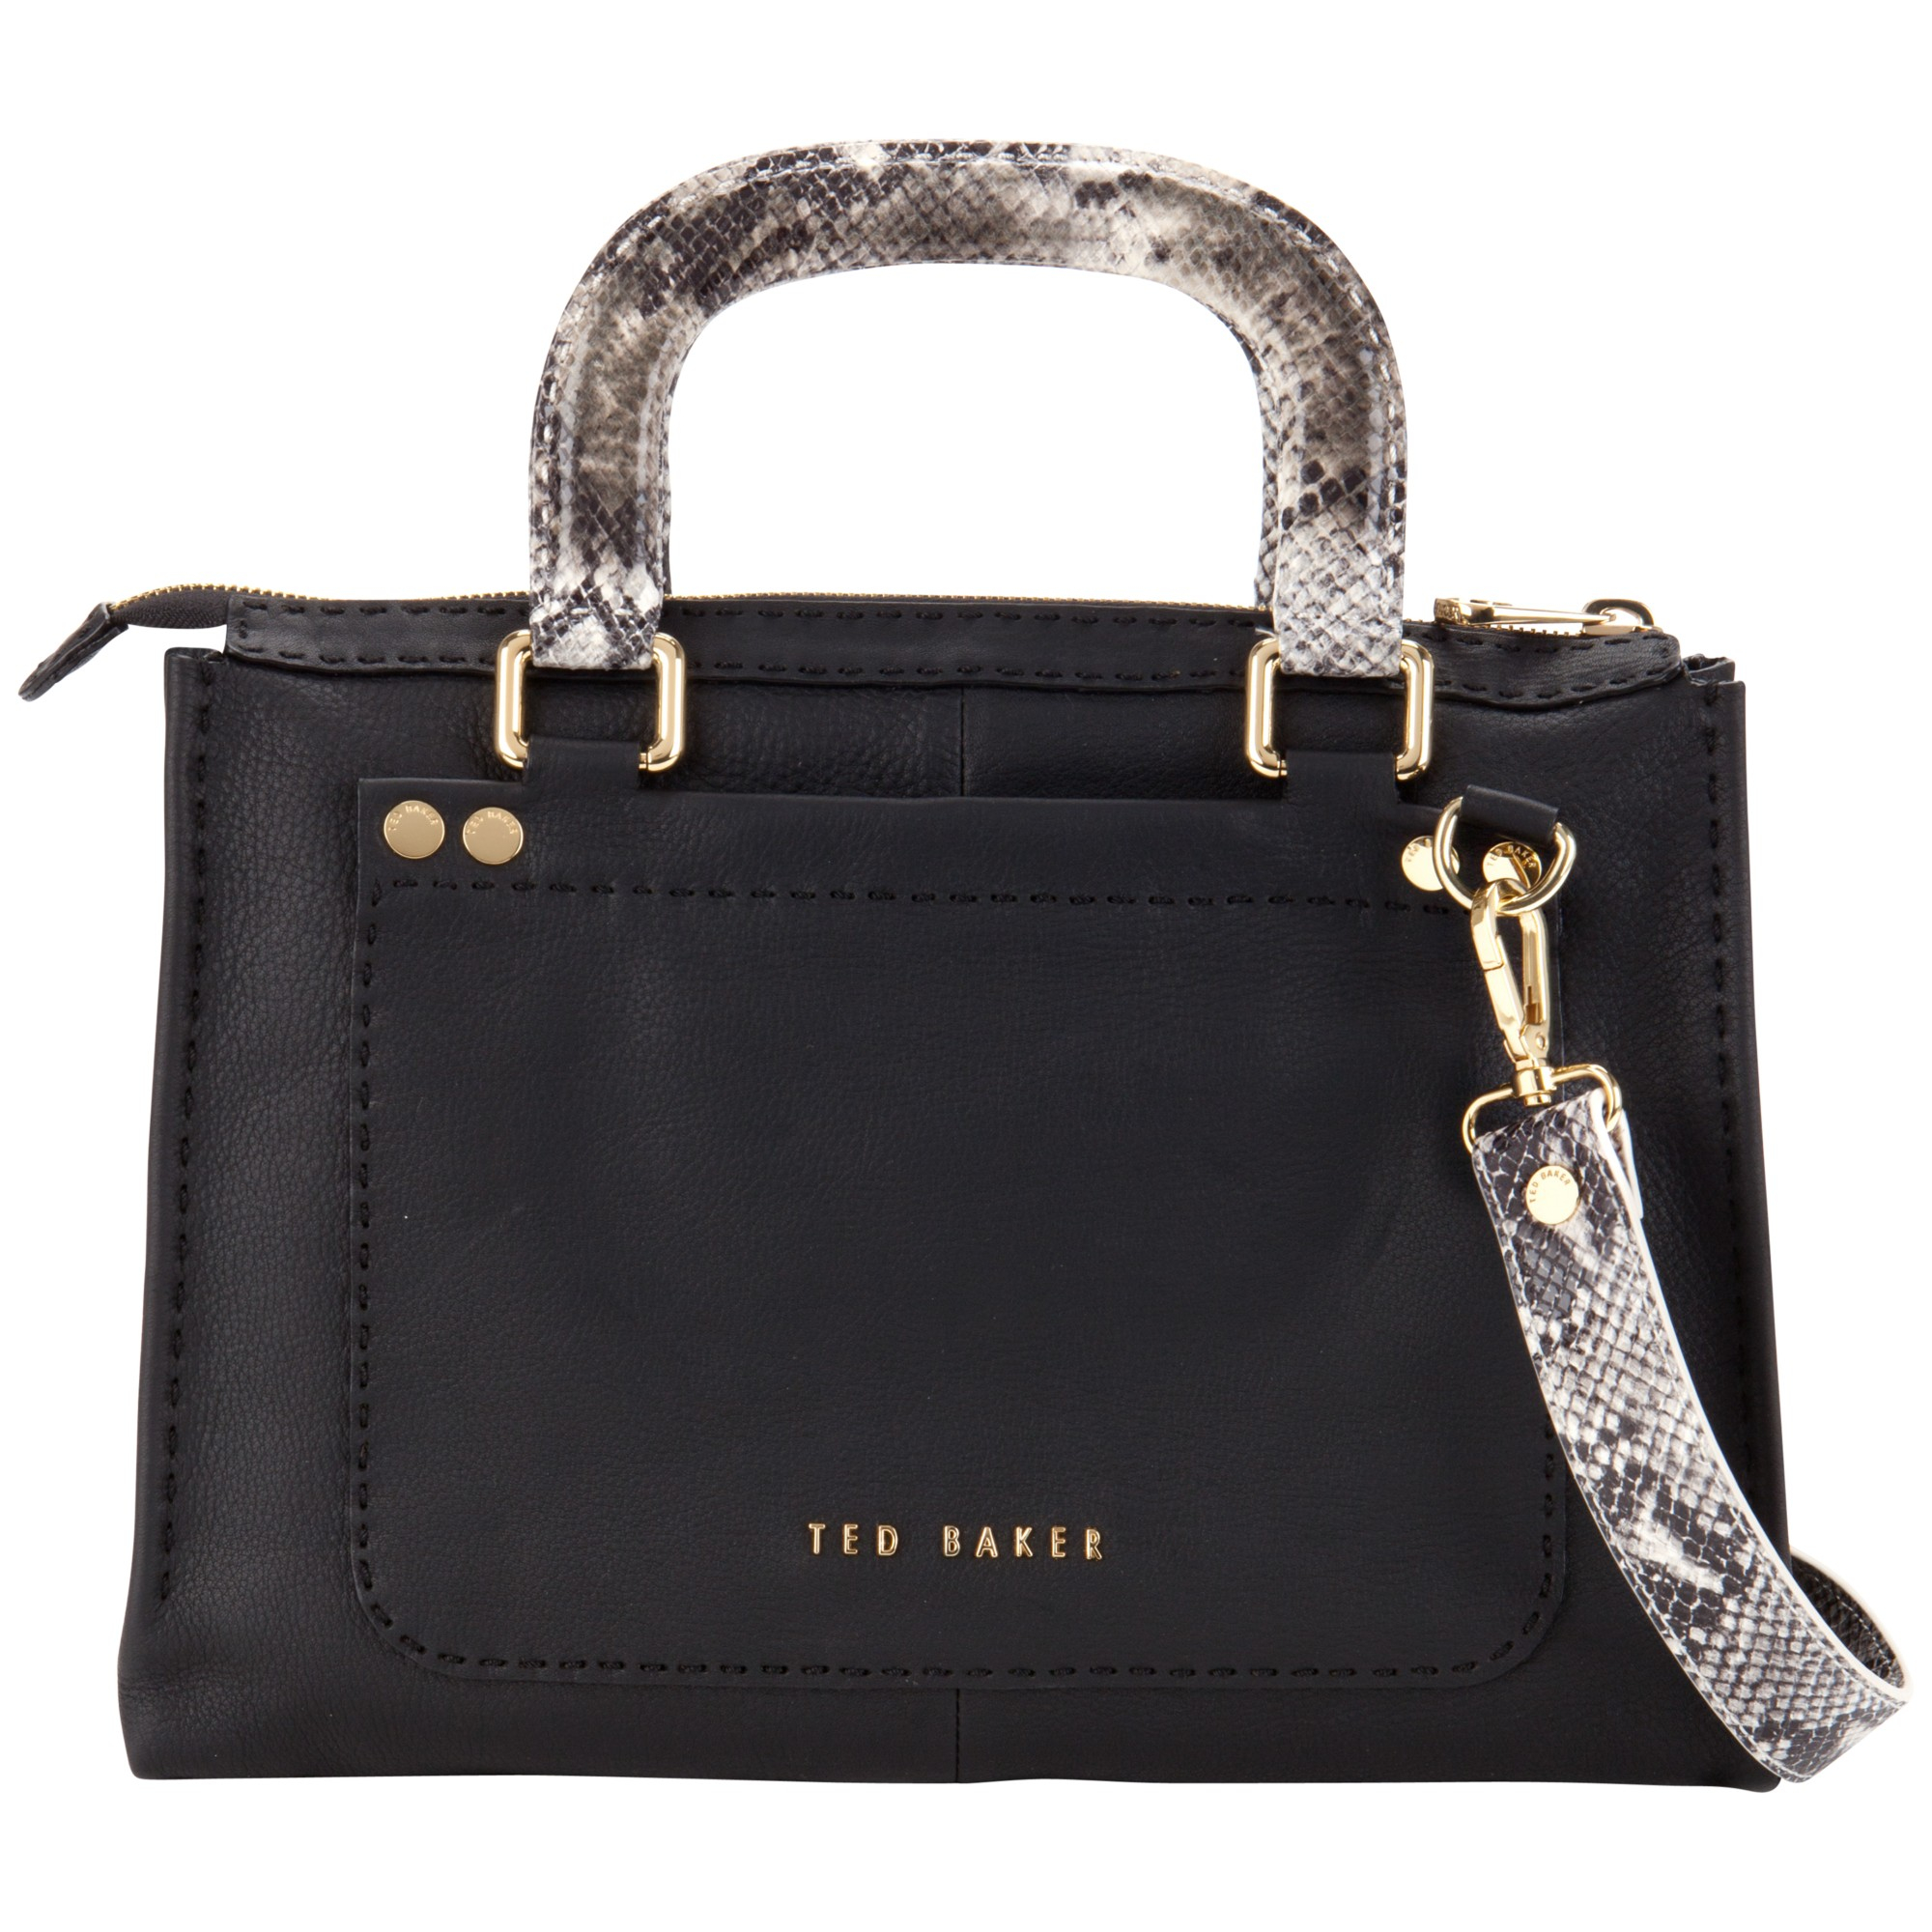 Ted Baker Snakory Leather Tote Bag in Black | Lyst